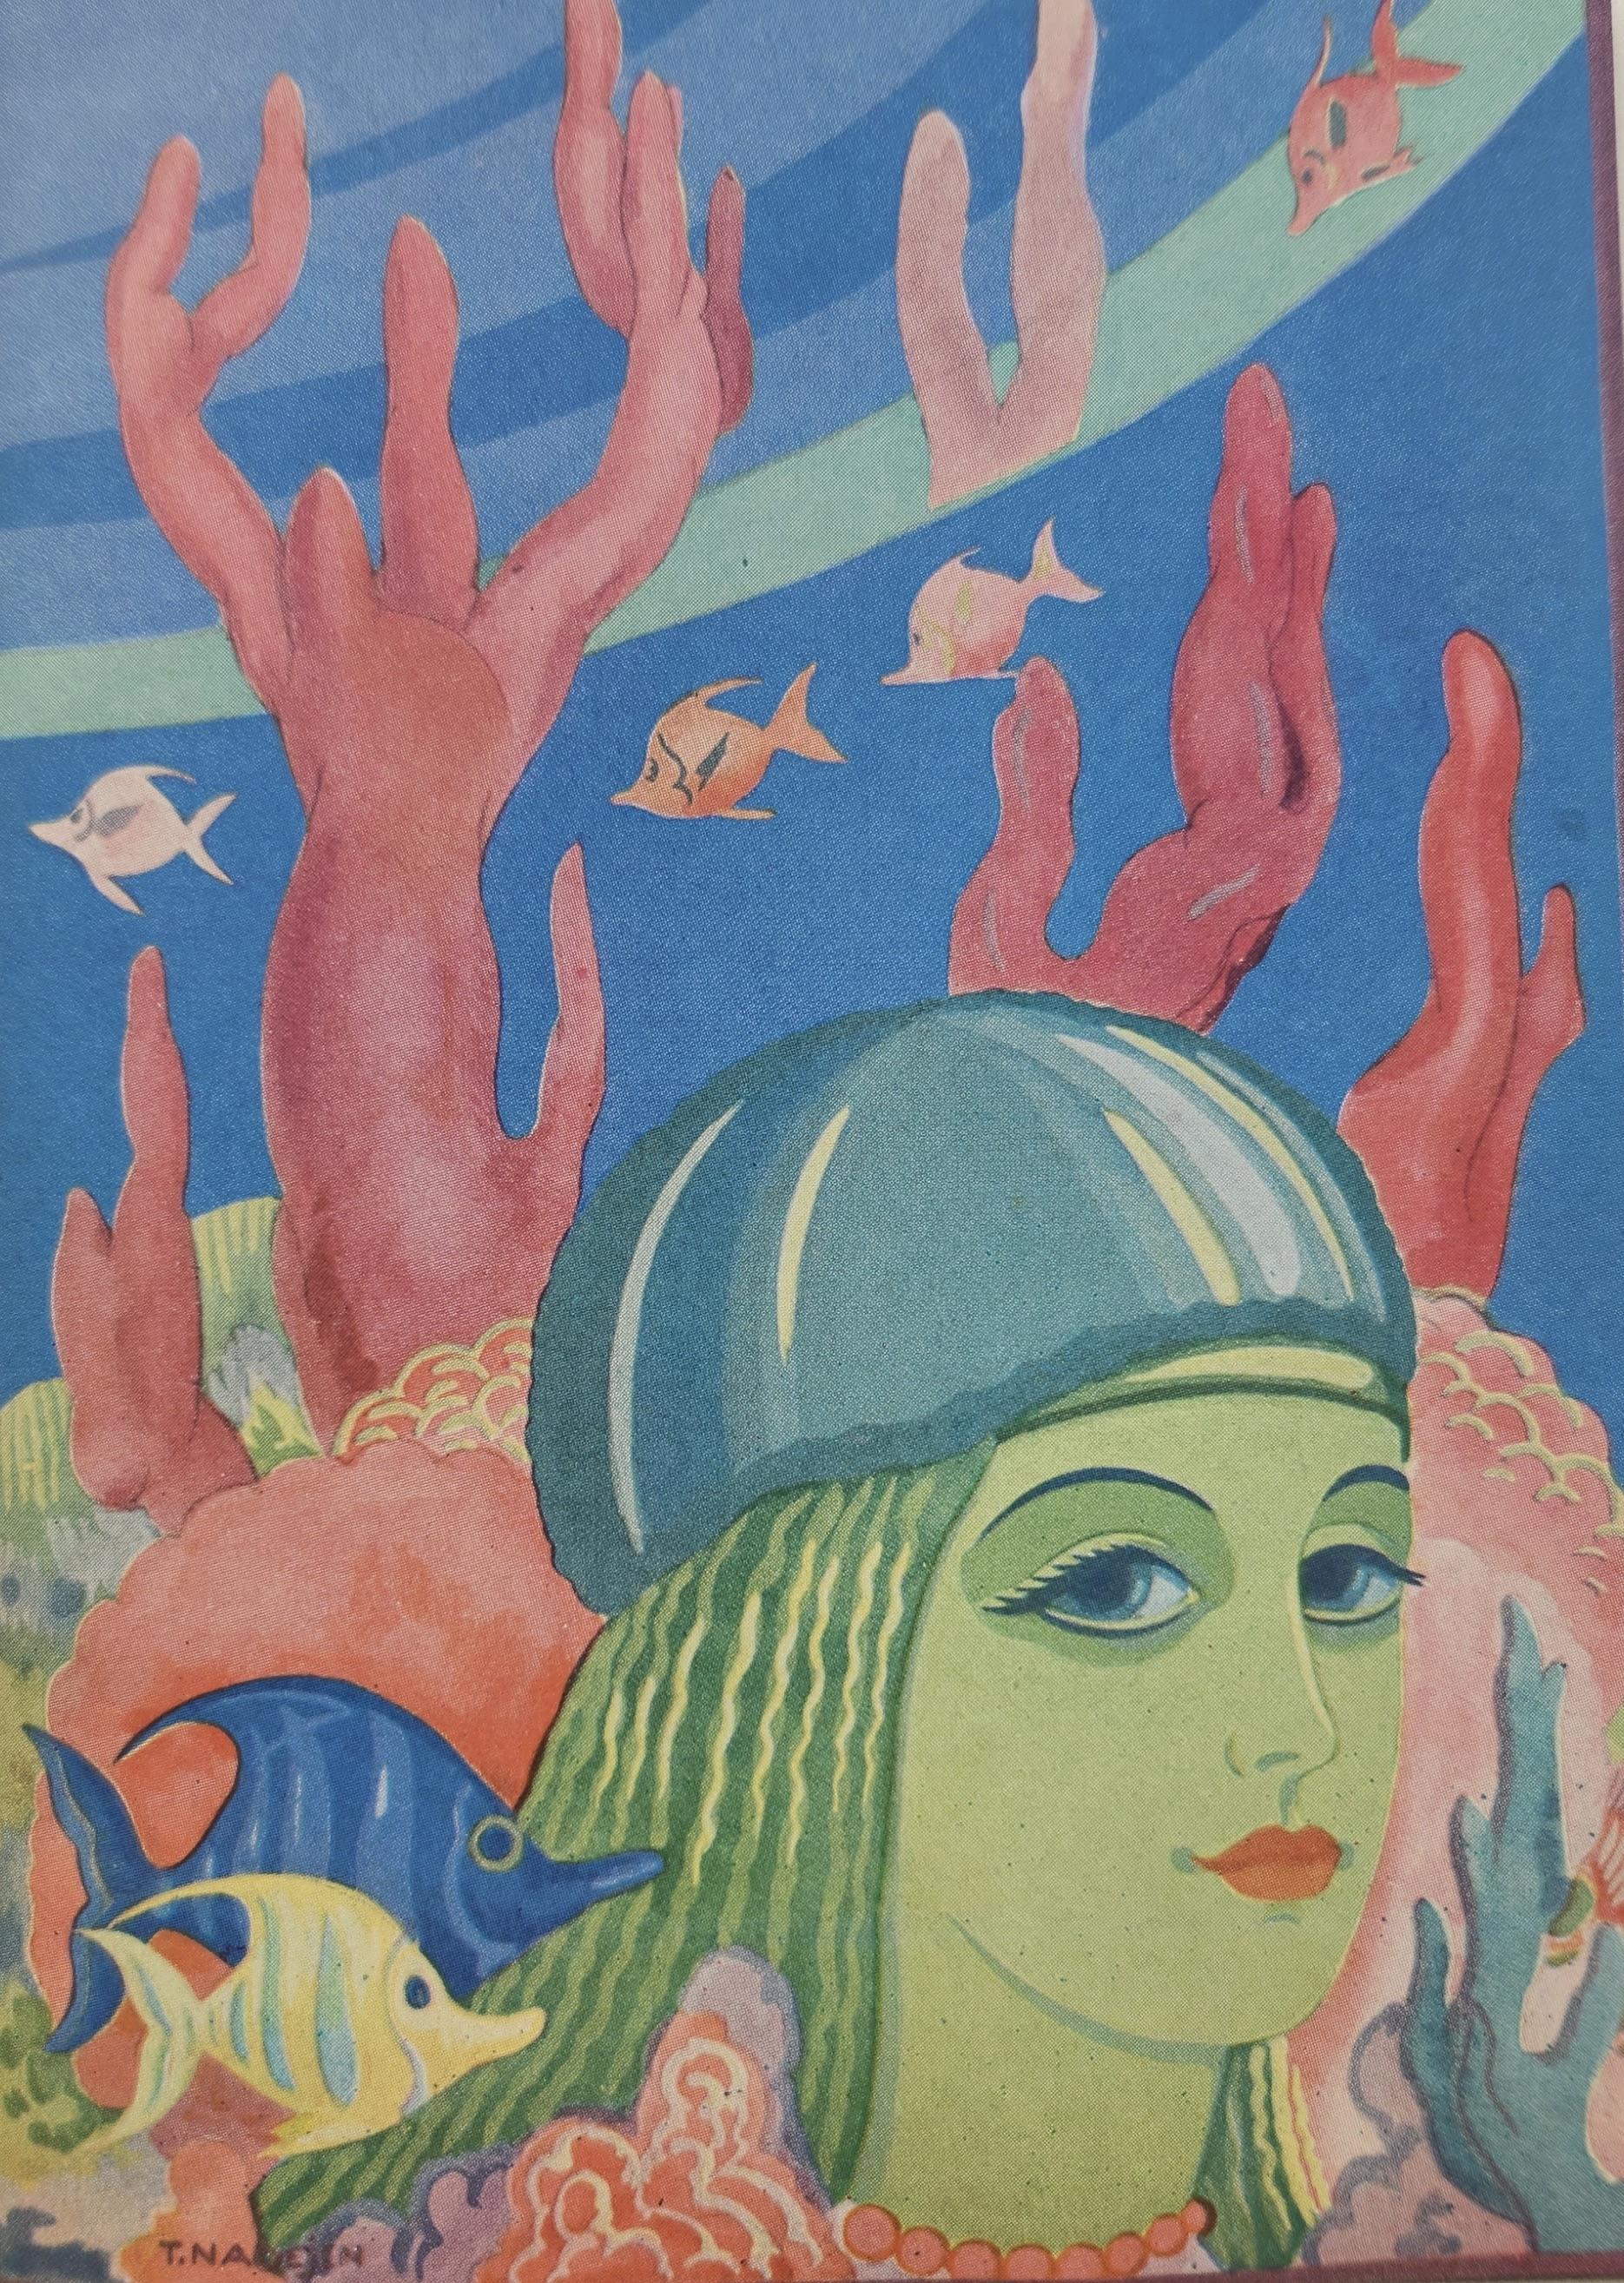 a mermaid in a 1920s hat, with coarl and fish